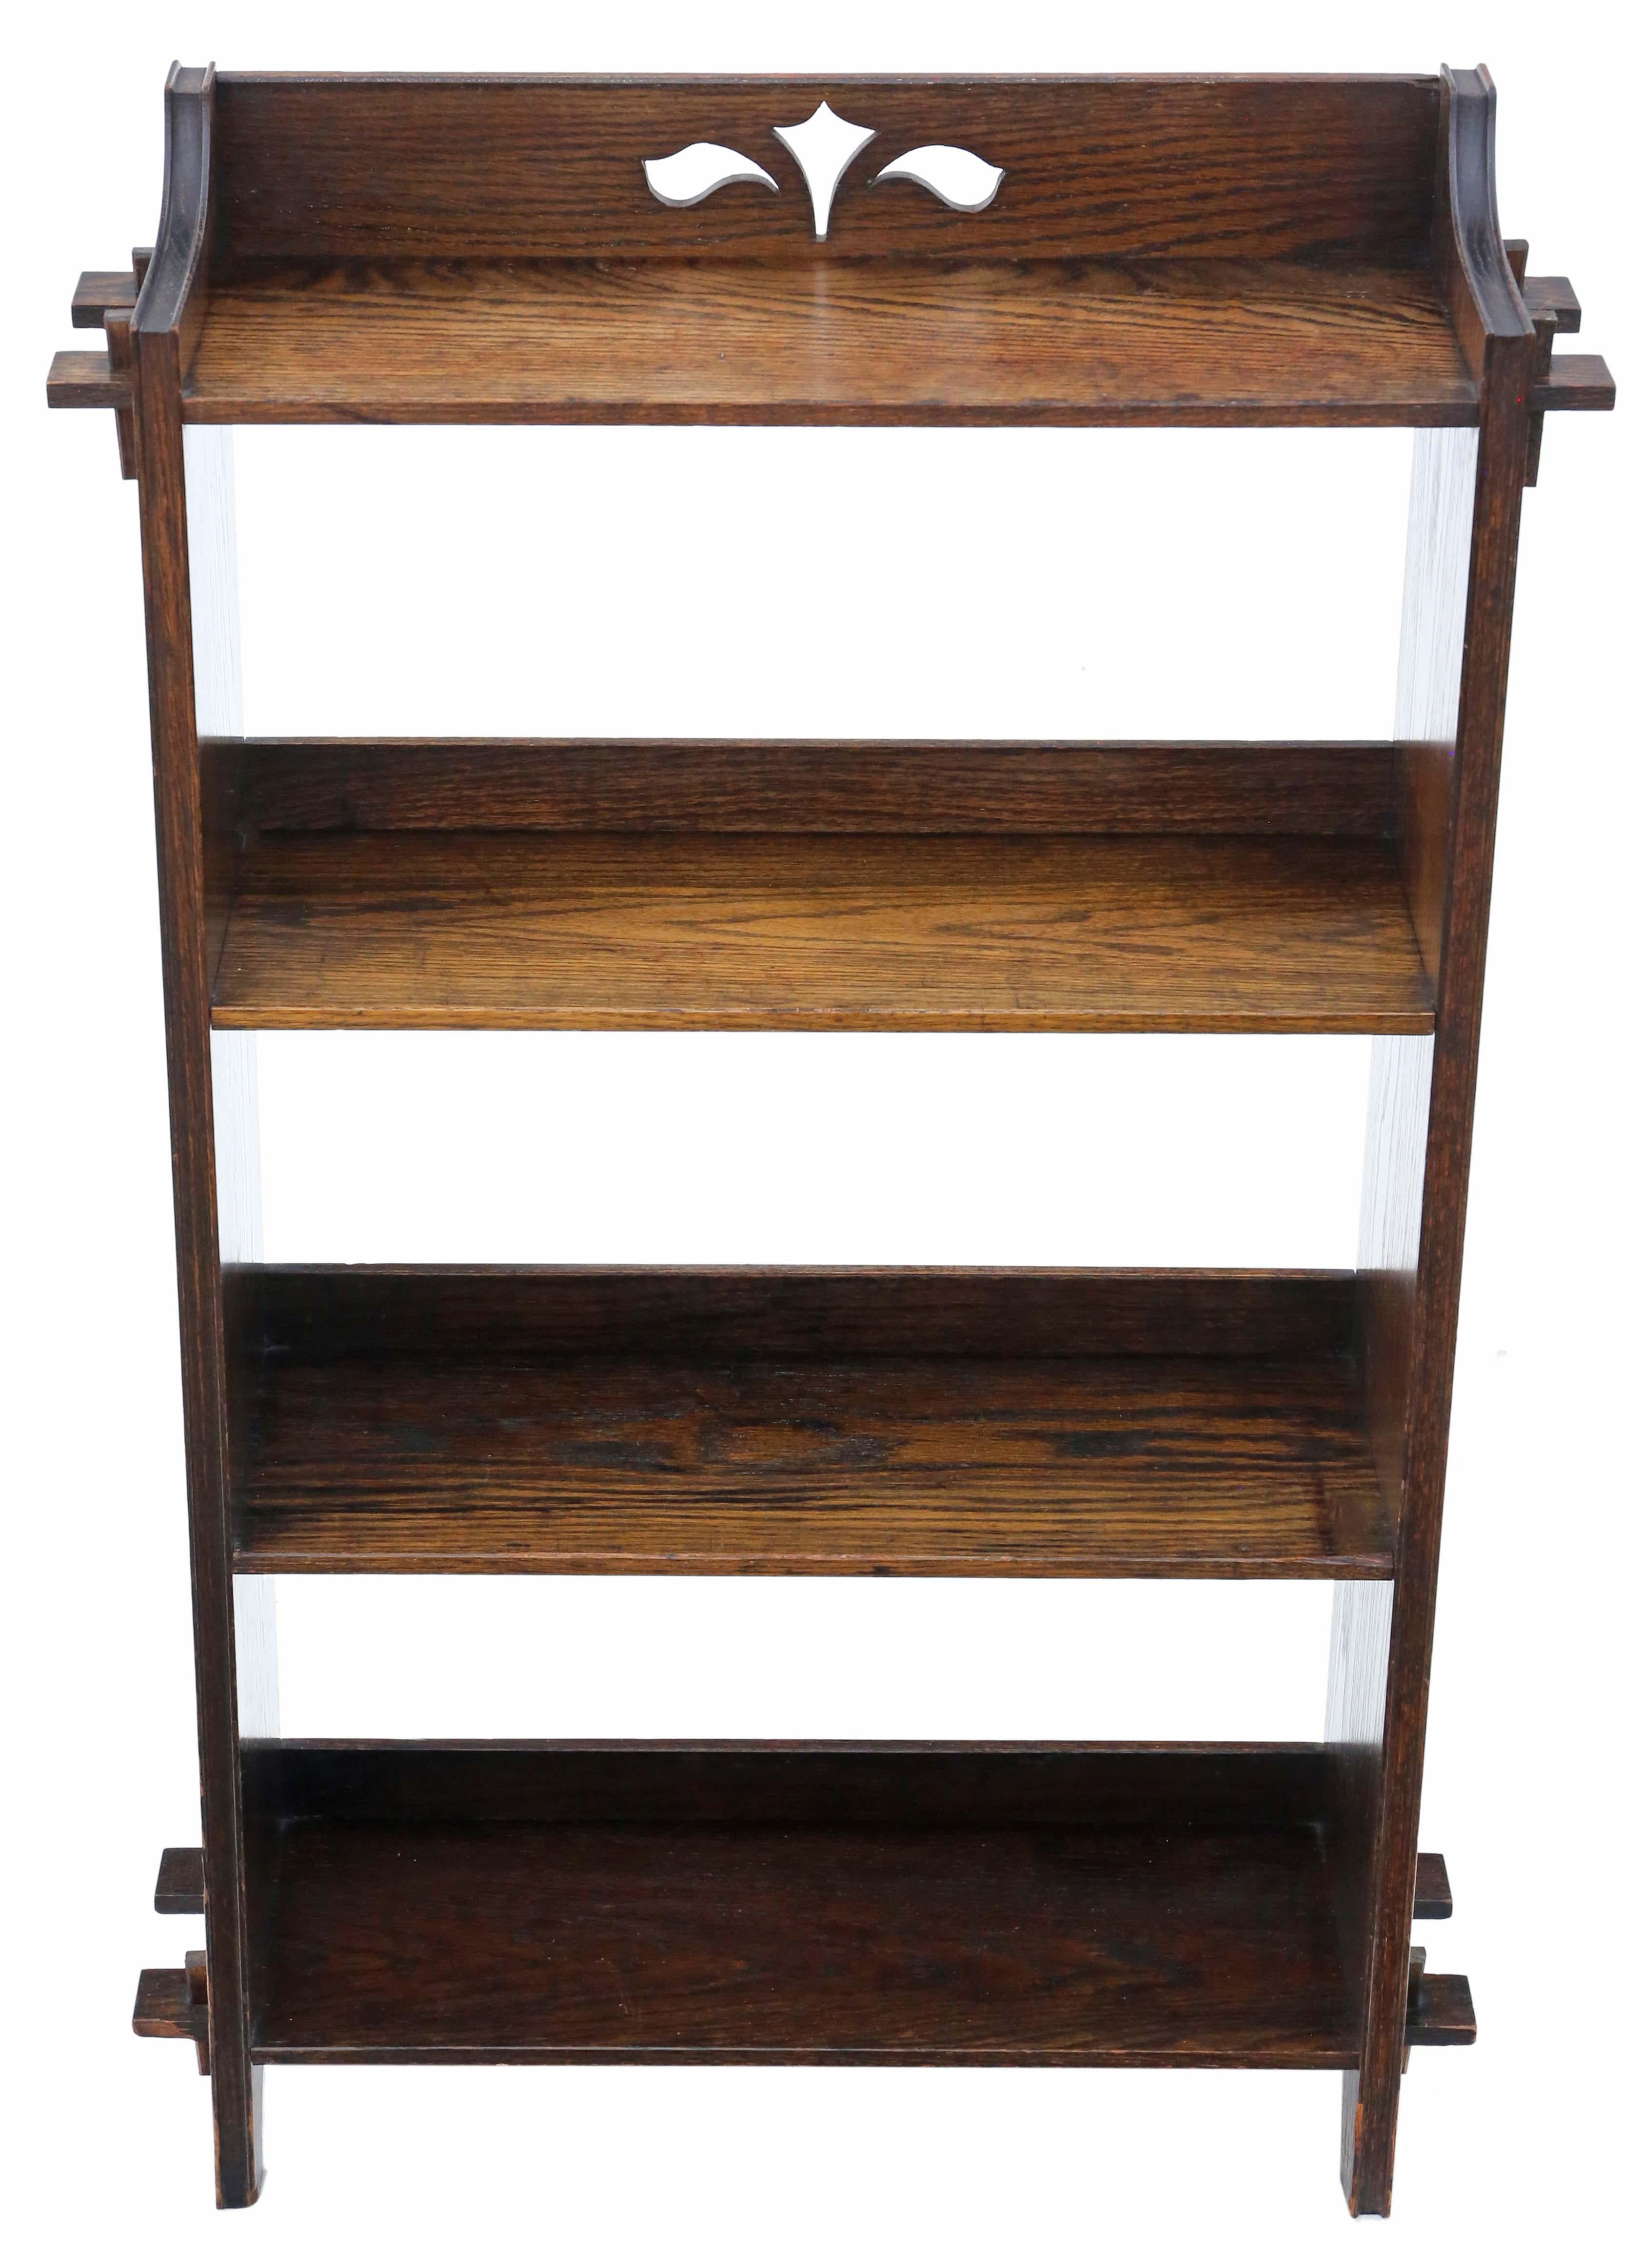 Antique quality Art Nouveau C1910 oak bookcase.

Full of age, charm and character.

Solid, with no loose joints and no woodworm.

Would look amazing in the right location!

Overall maximum dimensions: 64cmW x 20cmD x 100cmH.

Shelves 52cm x 18cm x